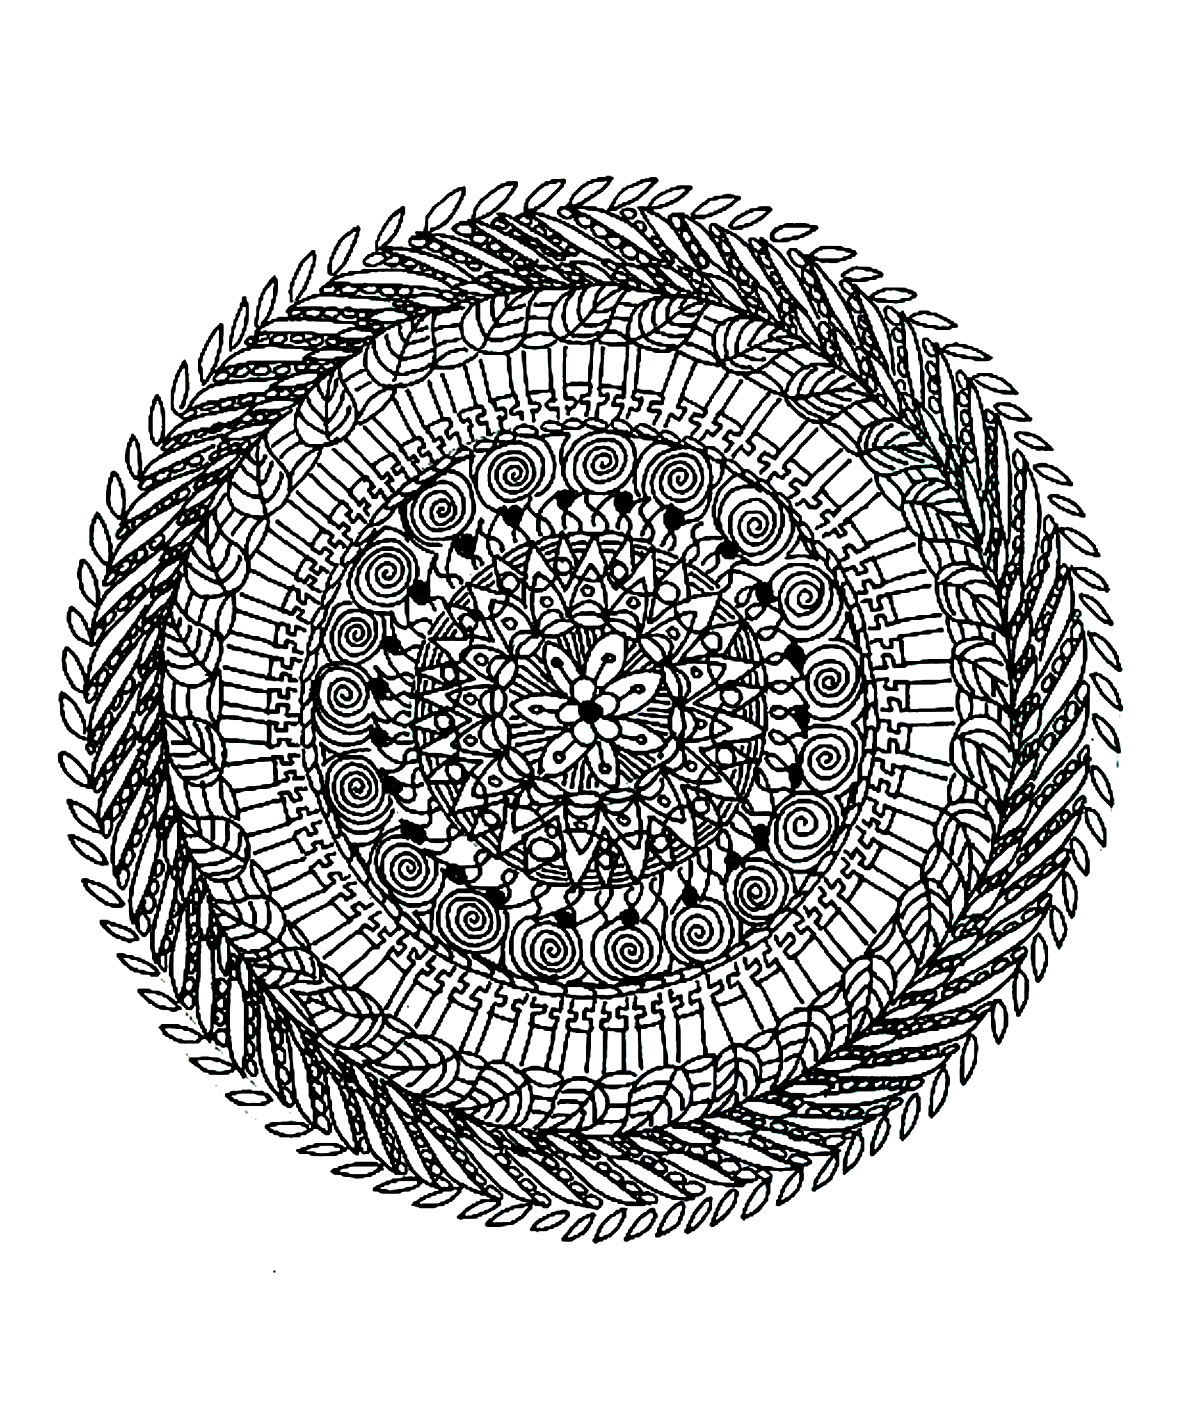 Mandala coloring page with different types of leaves. Prepare very fine pens and pencils, because this Mandala needs to be very meticulous, precise and picky, to get a good quality result.